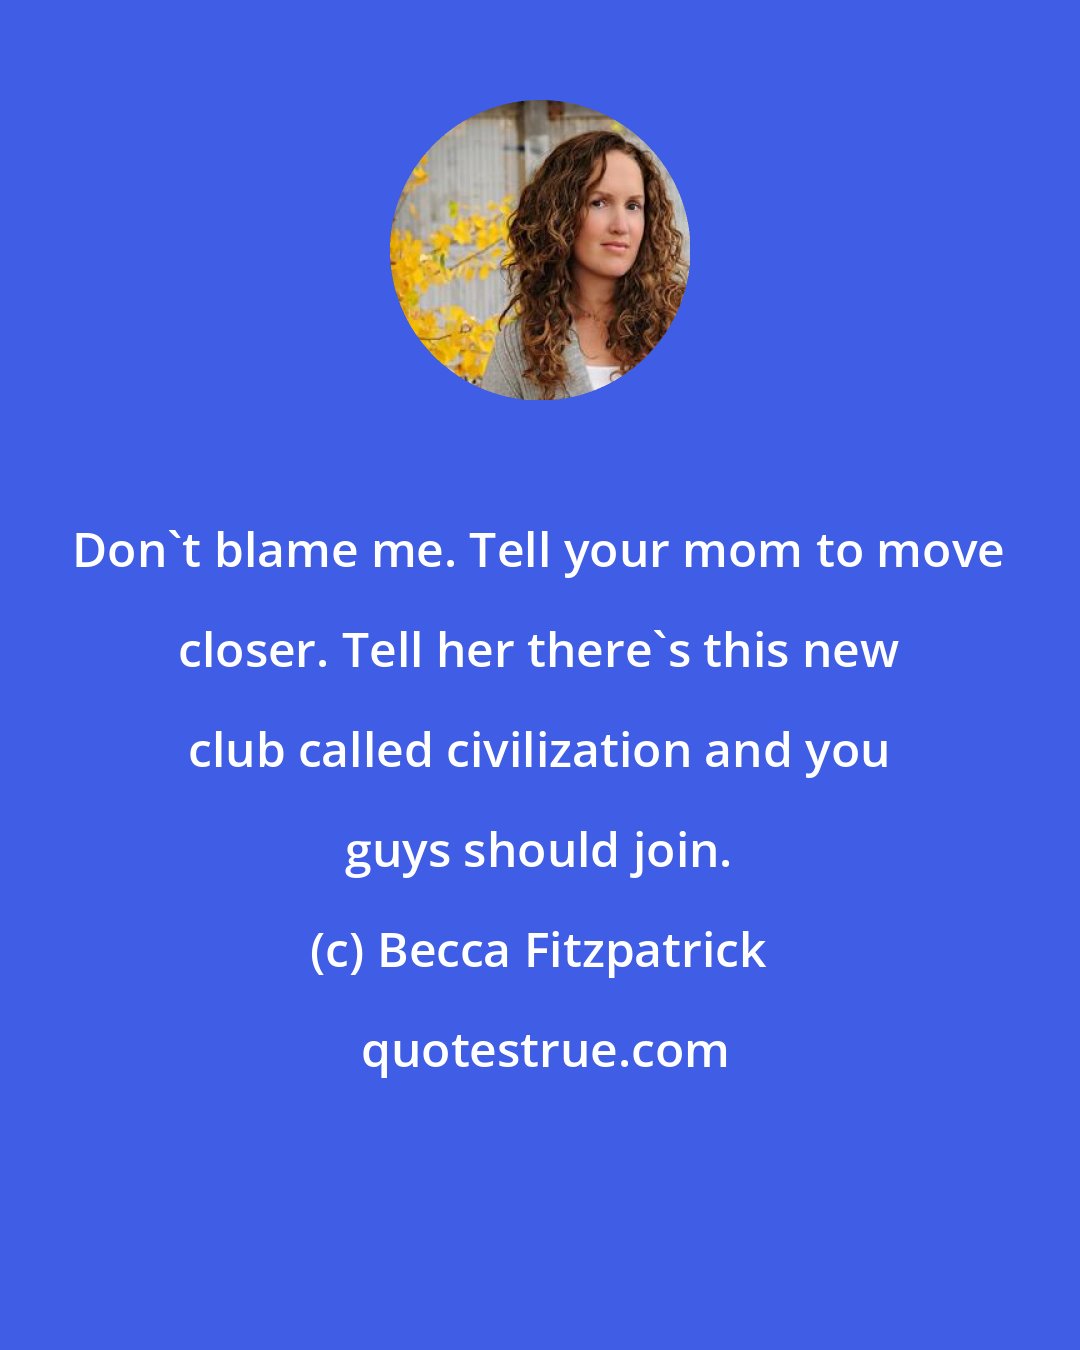 Becca Fitzpatrick: Don't blame me. Tell your mom to move closer. Tell her there's this new club called civilization and you guys should join.